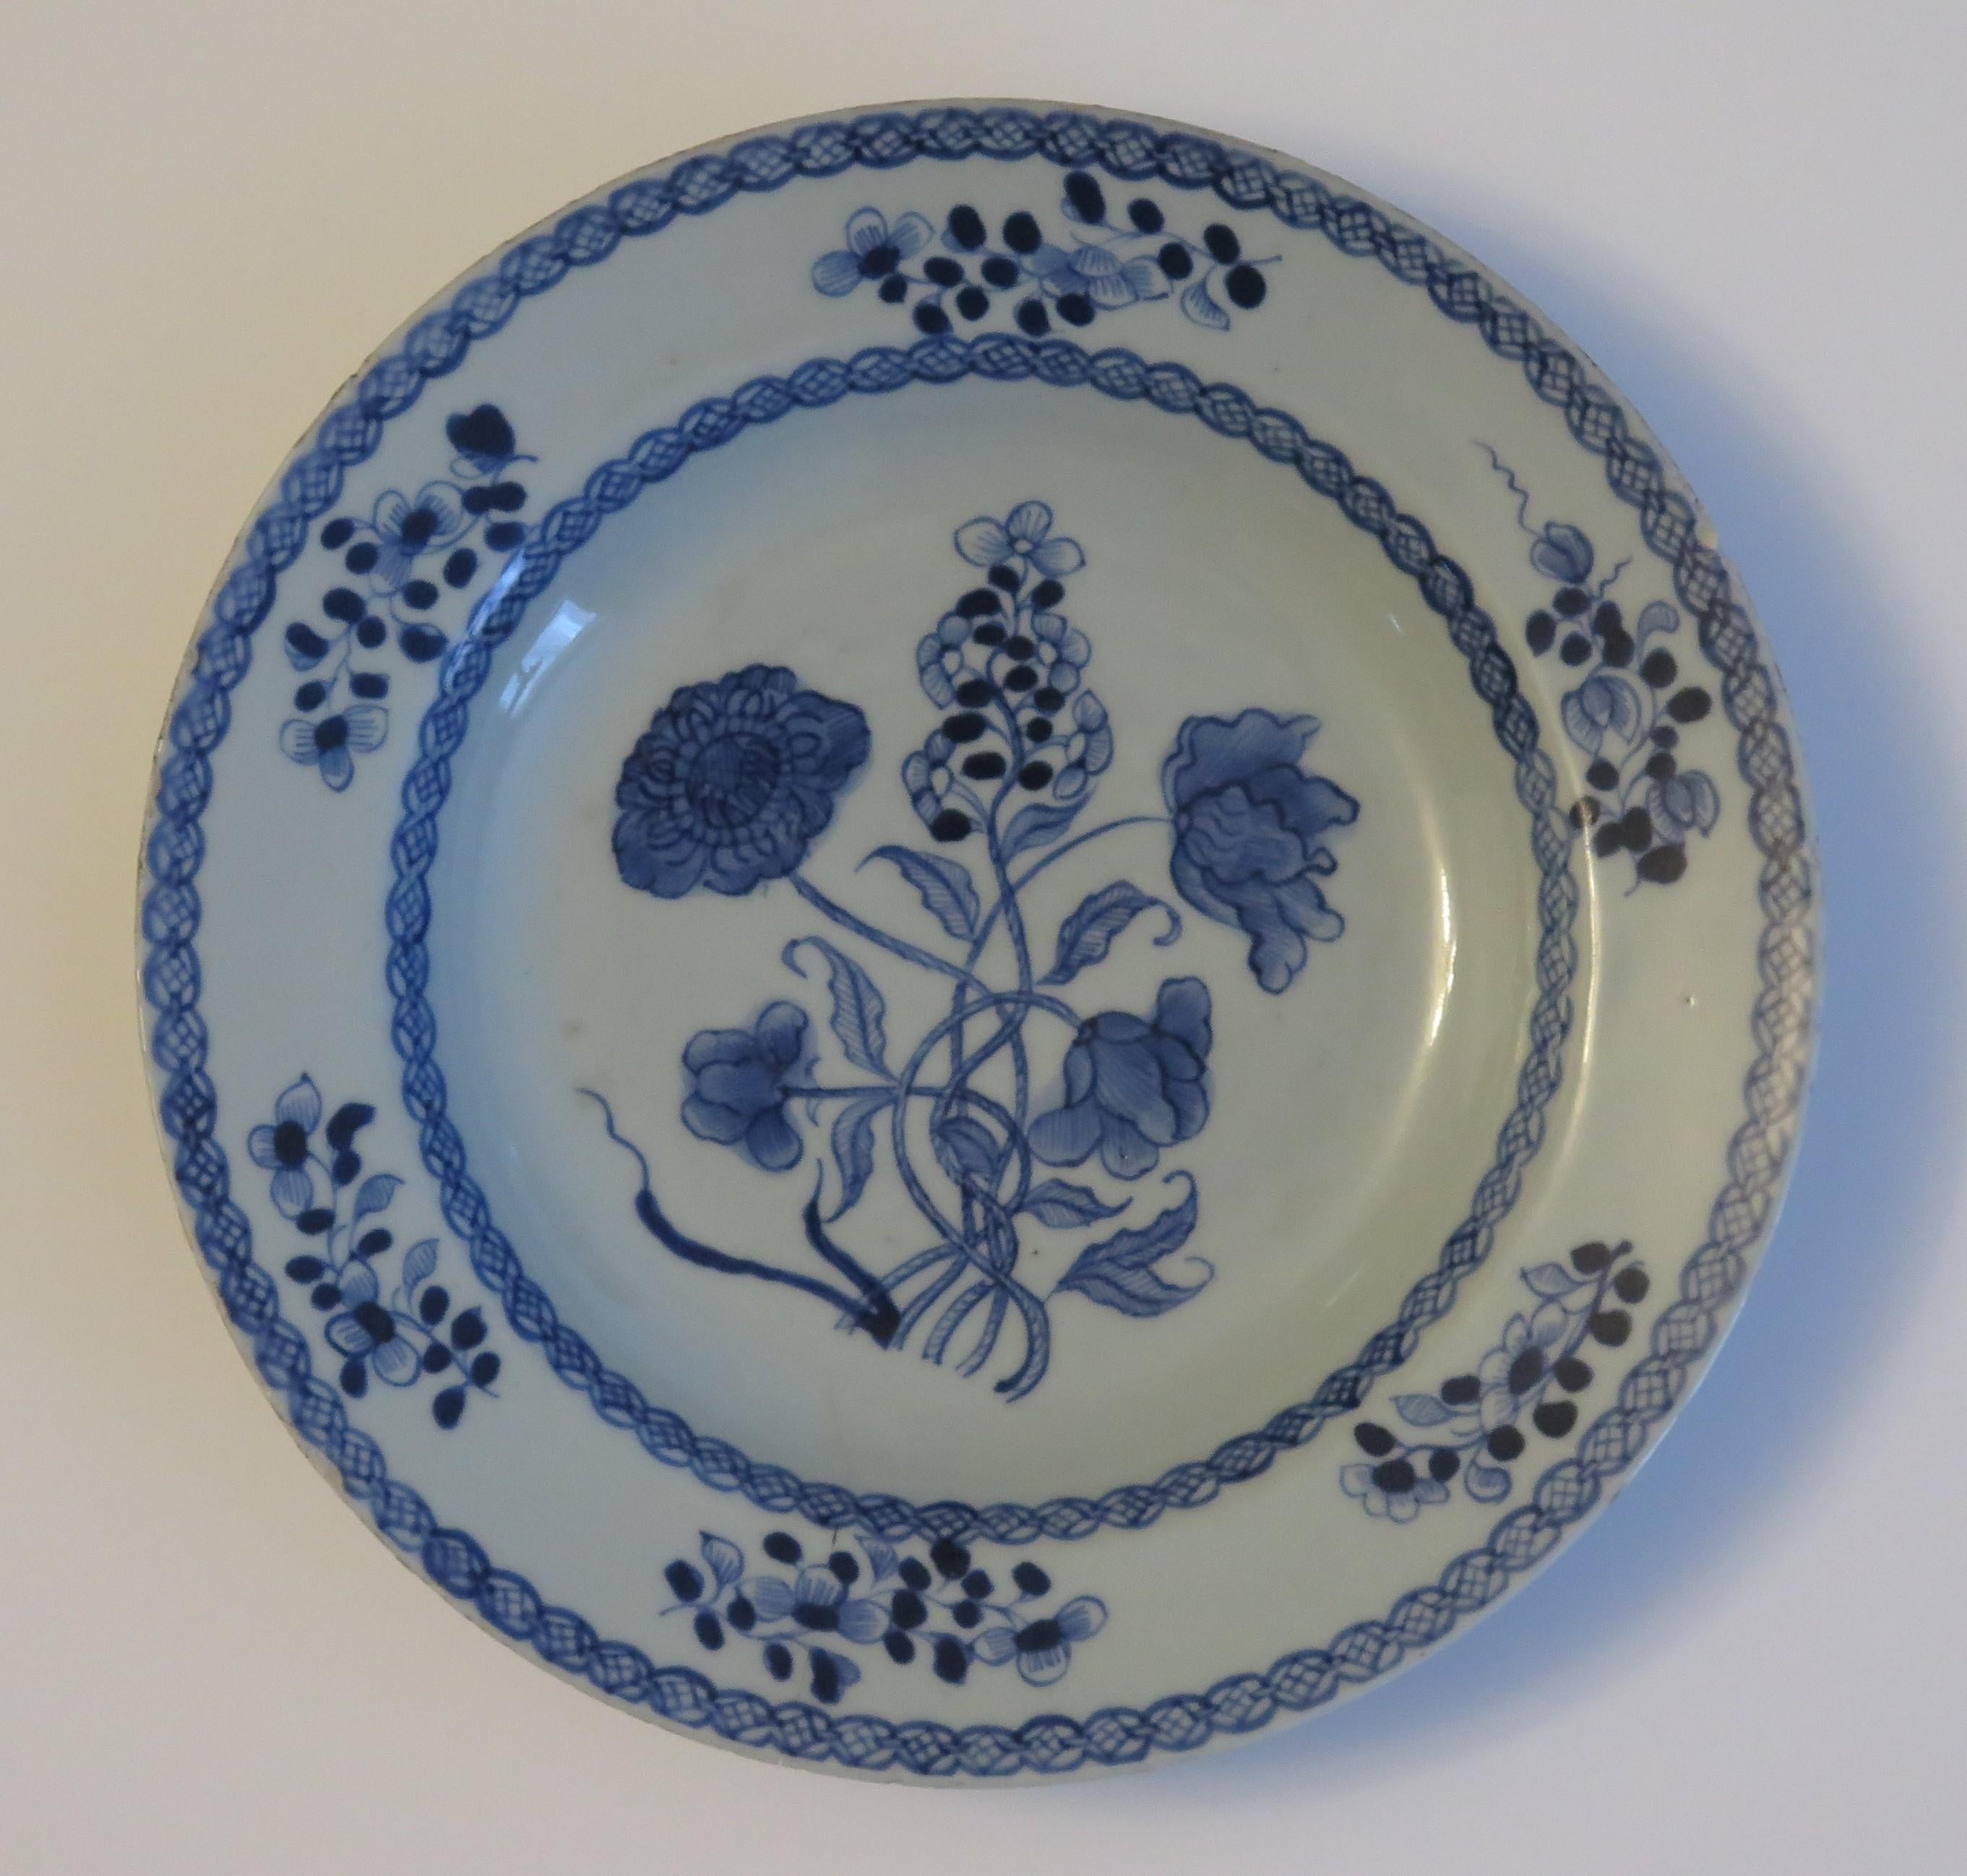 This is a good Chinese porcelain circular deep plate or soup bowl made for the export (Canton) market, during the middle of the 18th century, Qing-Qianlong period.

The plate is well hand decorated with good detail in varying shades of cobalt